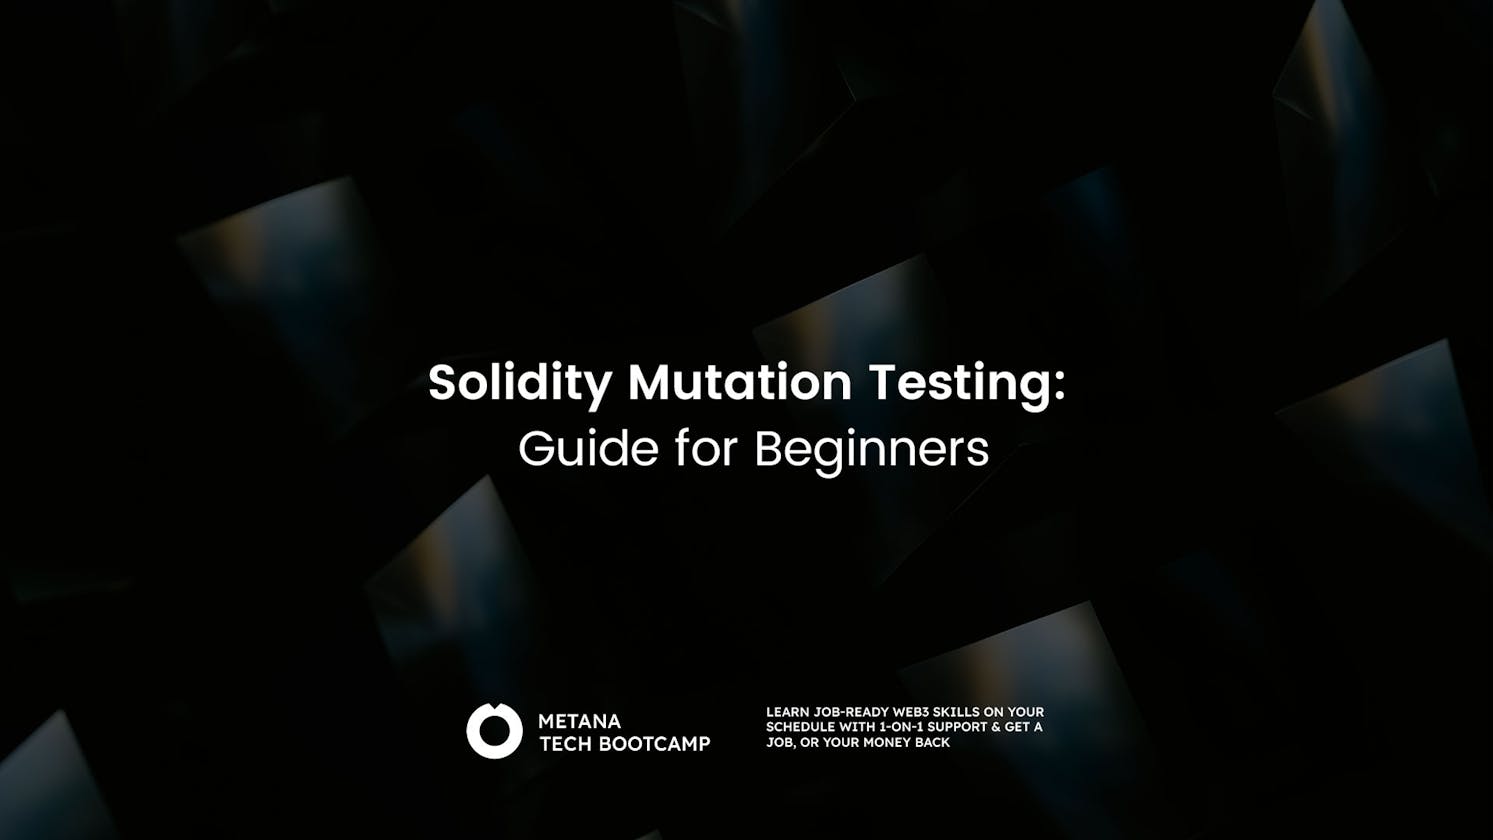 Solidity Mutation Testing: Guide for Beginners